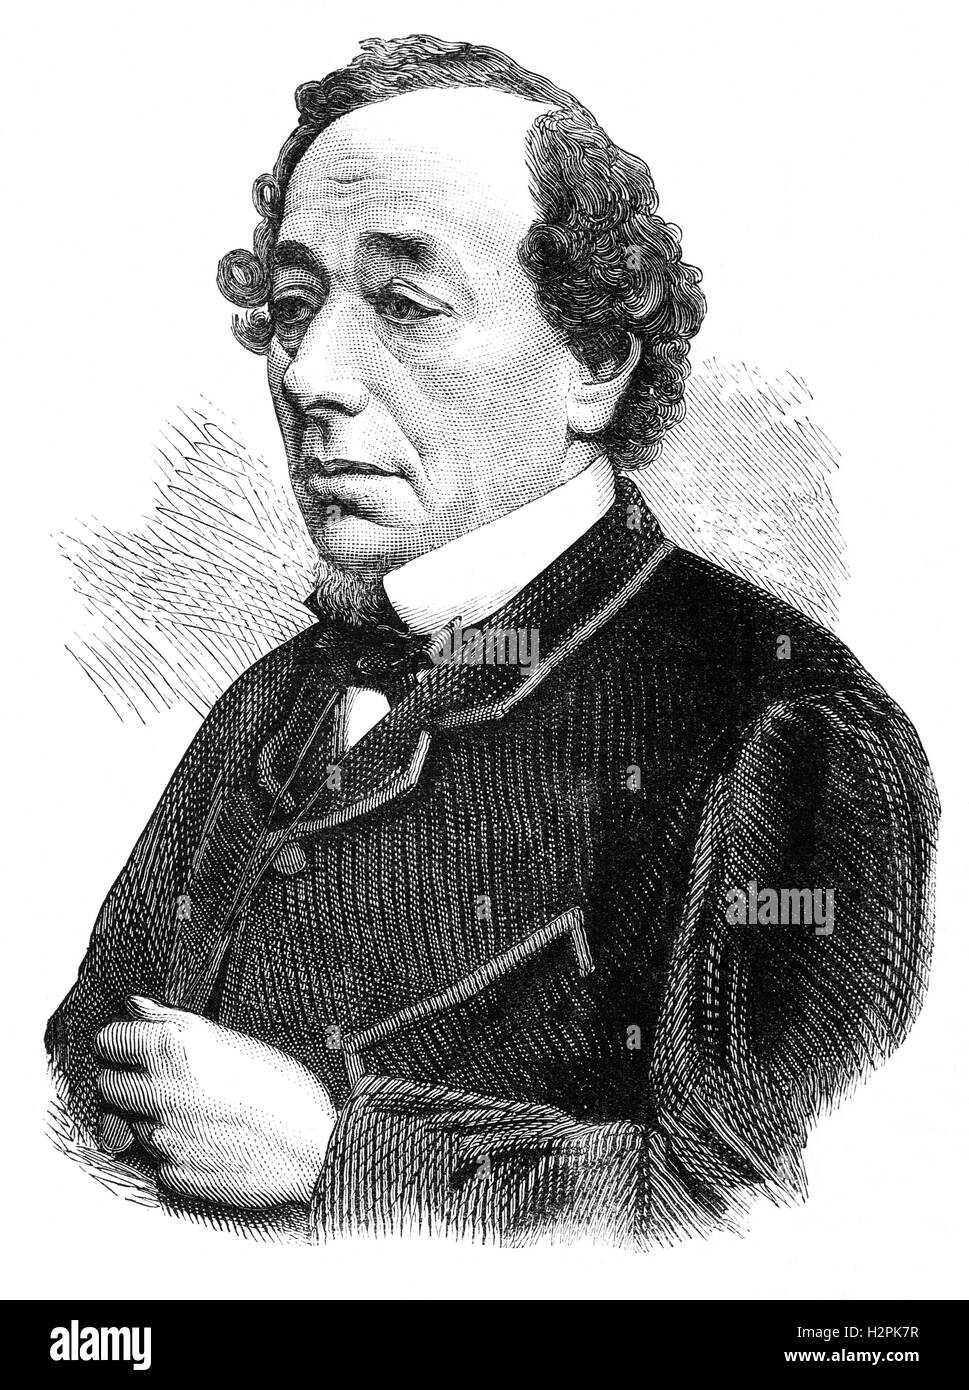 Benjamin Disraeli, 1st Earl of Beaconsfield, (1804 – 1881) was a British politician and writer, who twice served as Prime Minister. He played a central role in the creation of the modern Conservative Party and was the only British Prime Minister of Jewish birth. Stock Photo